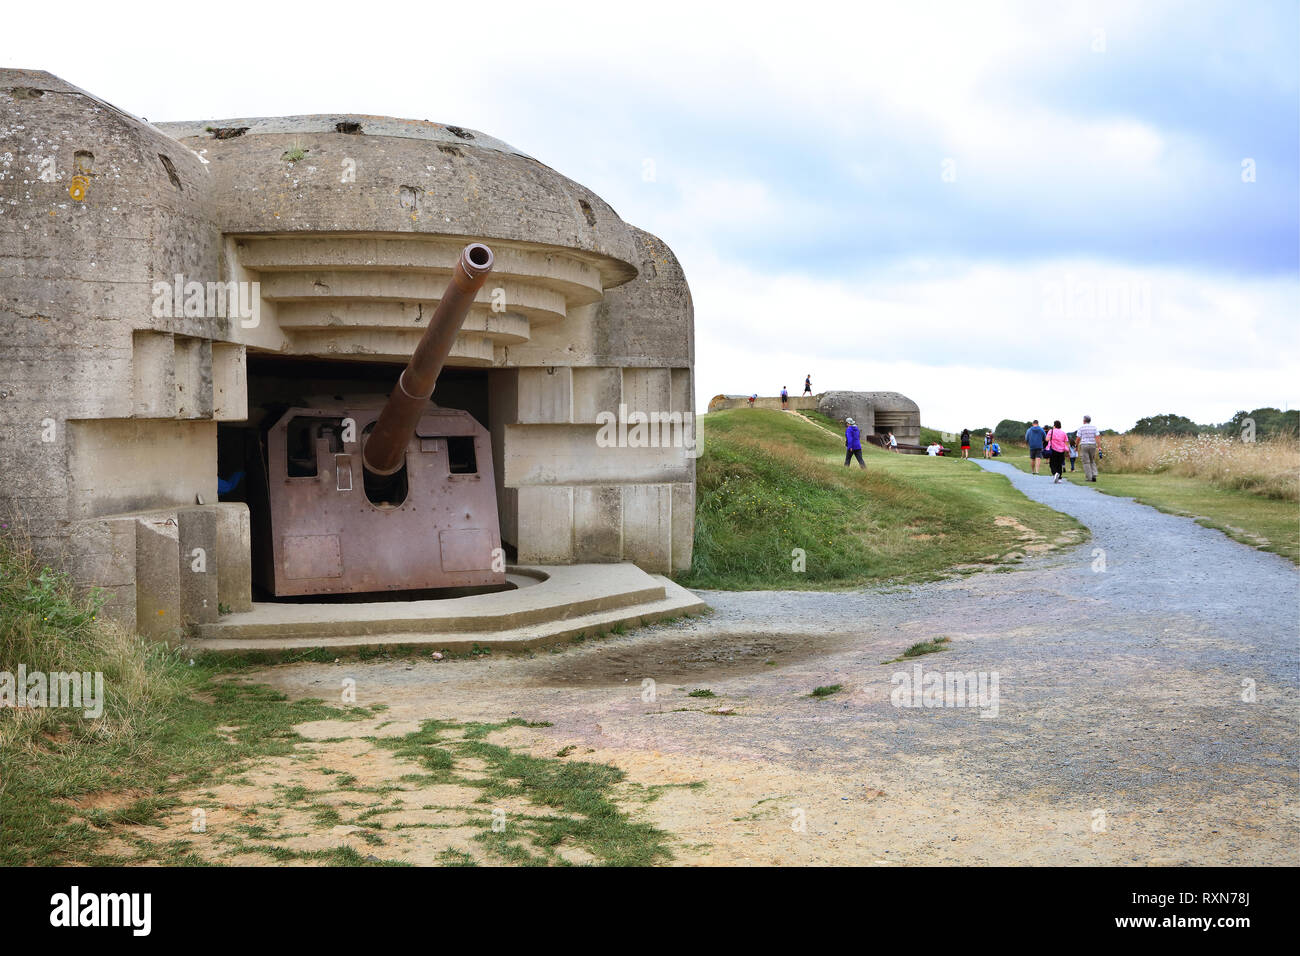 One of four 152-mm guns protected by a concrete casemate that was part of Germany's Atlantic Wall defense on D-Day at Longues-sur-Mer, Normandy, France Stock Photo